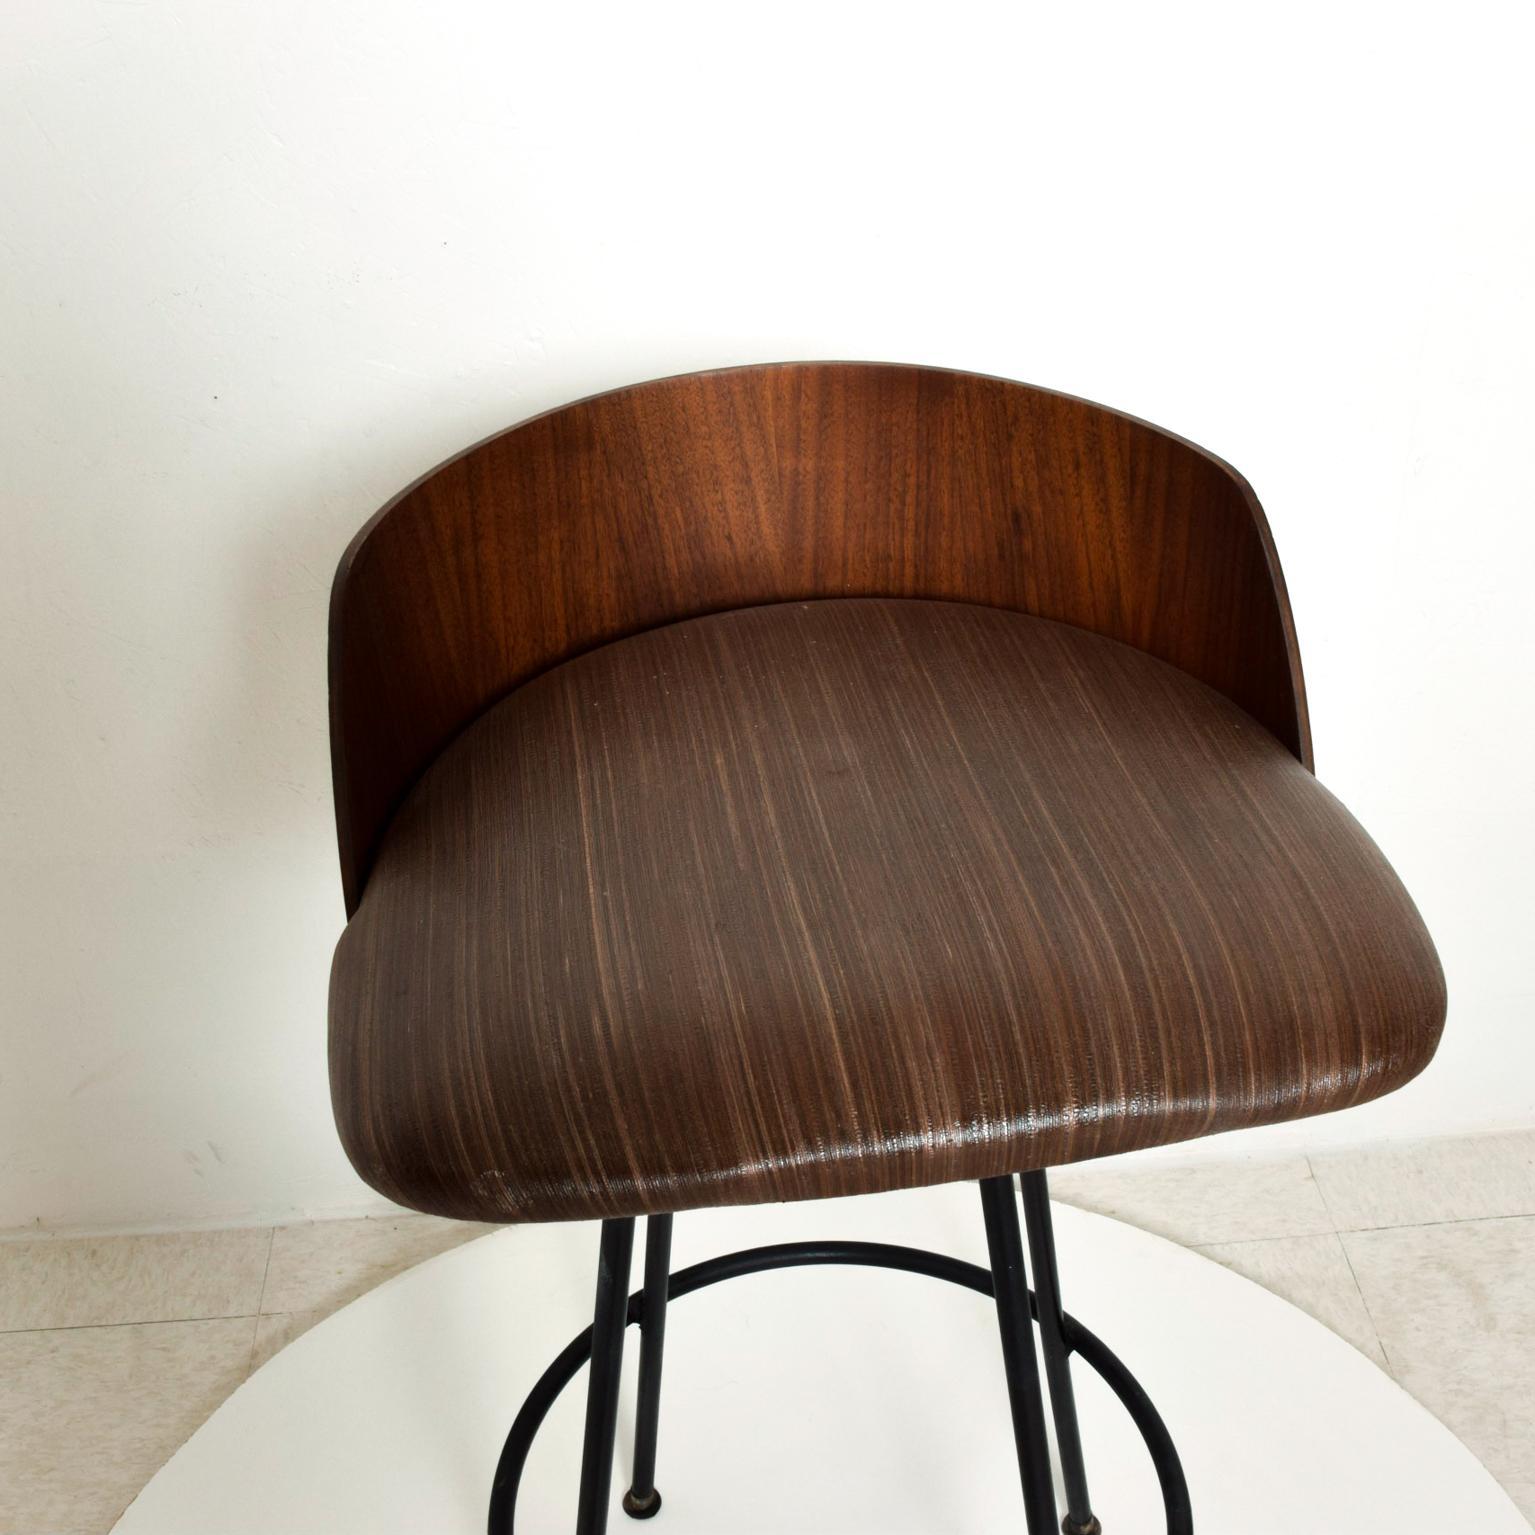 We are pleased to offer for your consideration, a rare and beautiful sculptural barstool designed by Chet Beardsley. Round bent walnut plywood with tubular steel in black color with the original modern vinyl upholstery. Made in the USA circa 1960s.